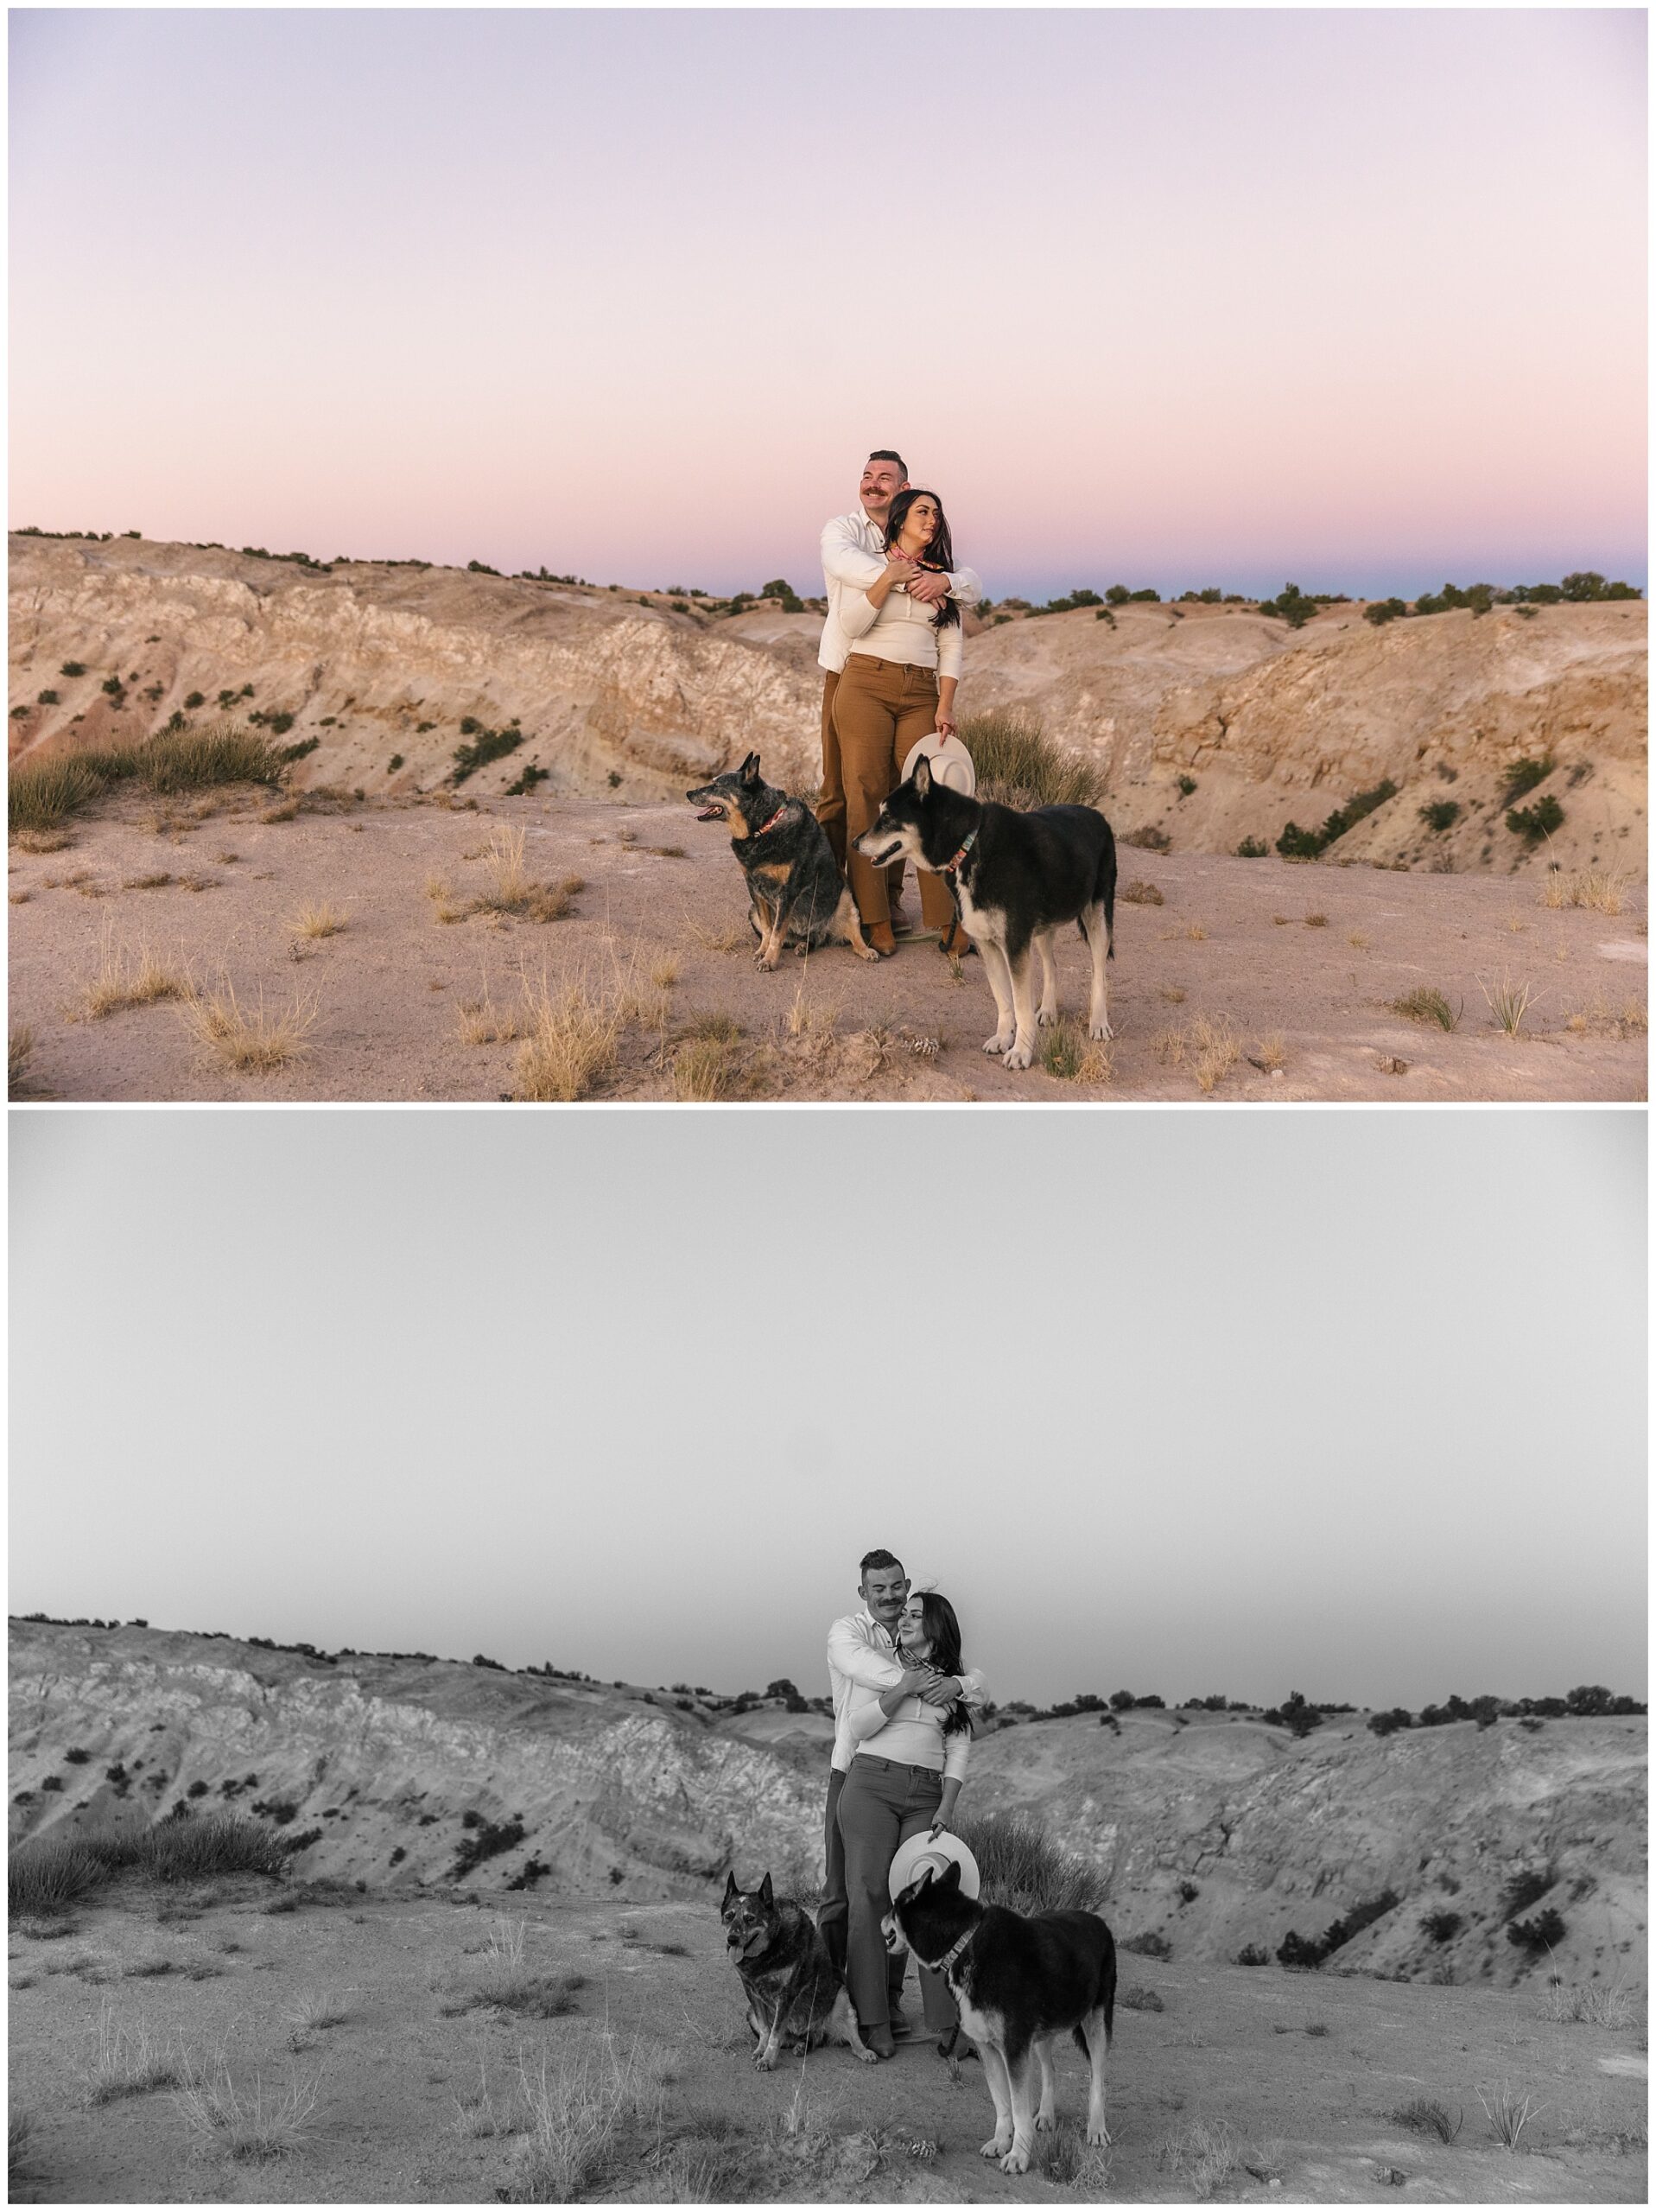 White Ridge engagement shoot with two dogs at sunset in New Mexico desert